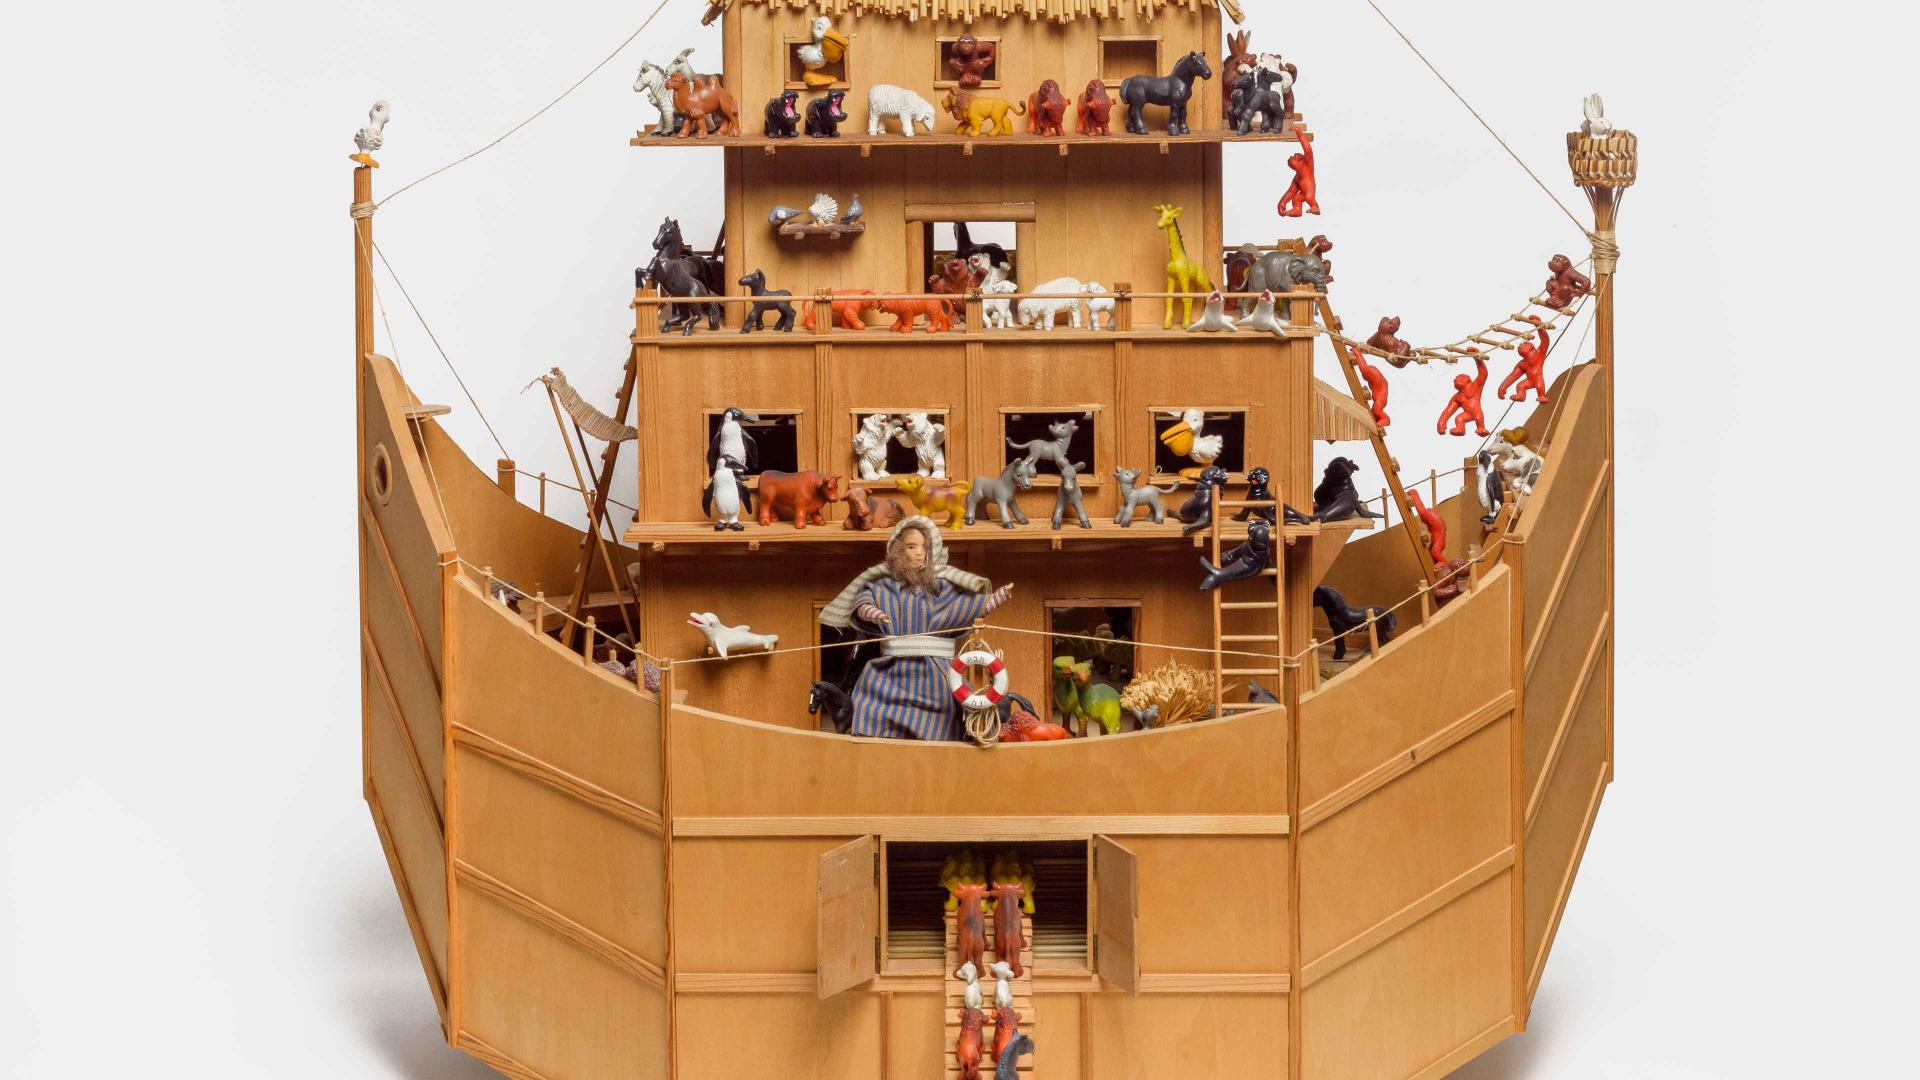 Detail of a wooden ark with toy figures